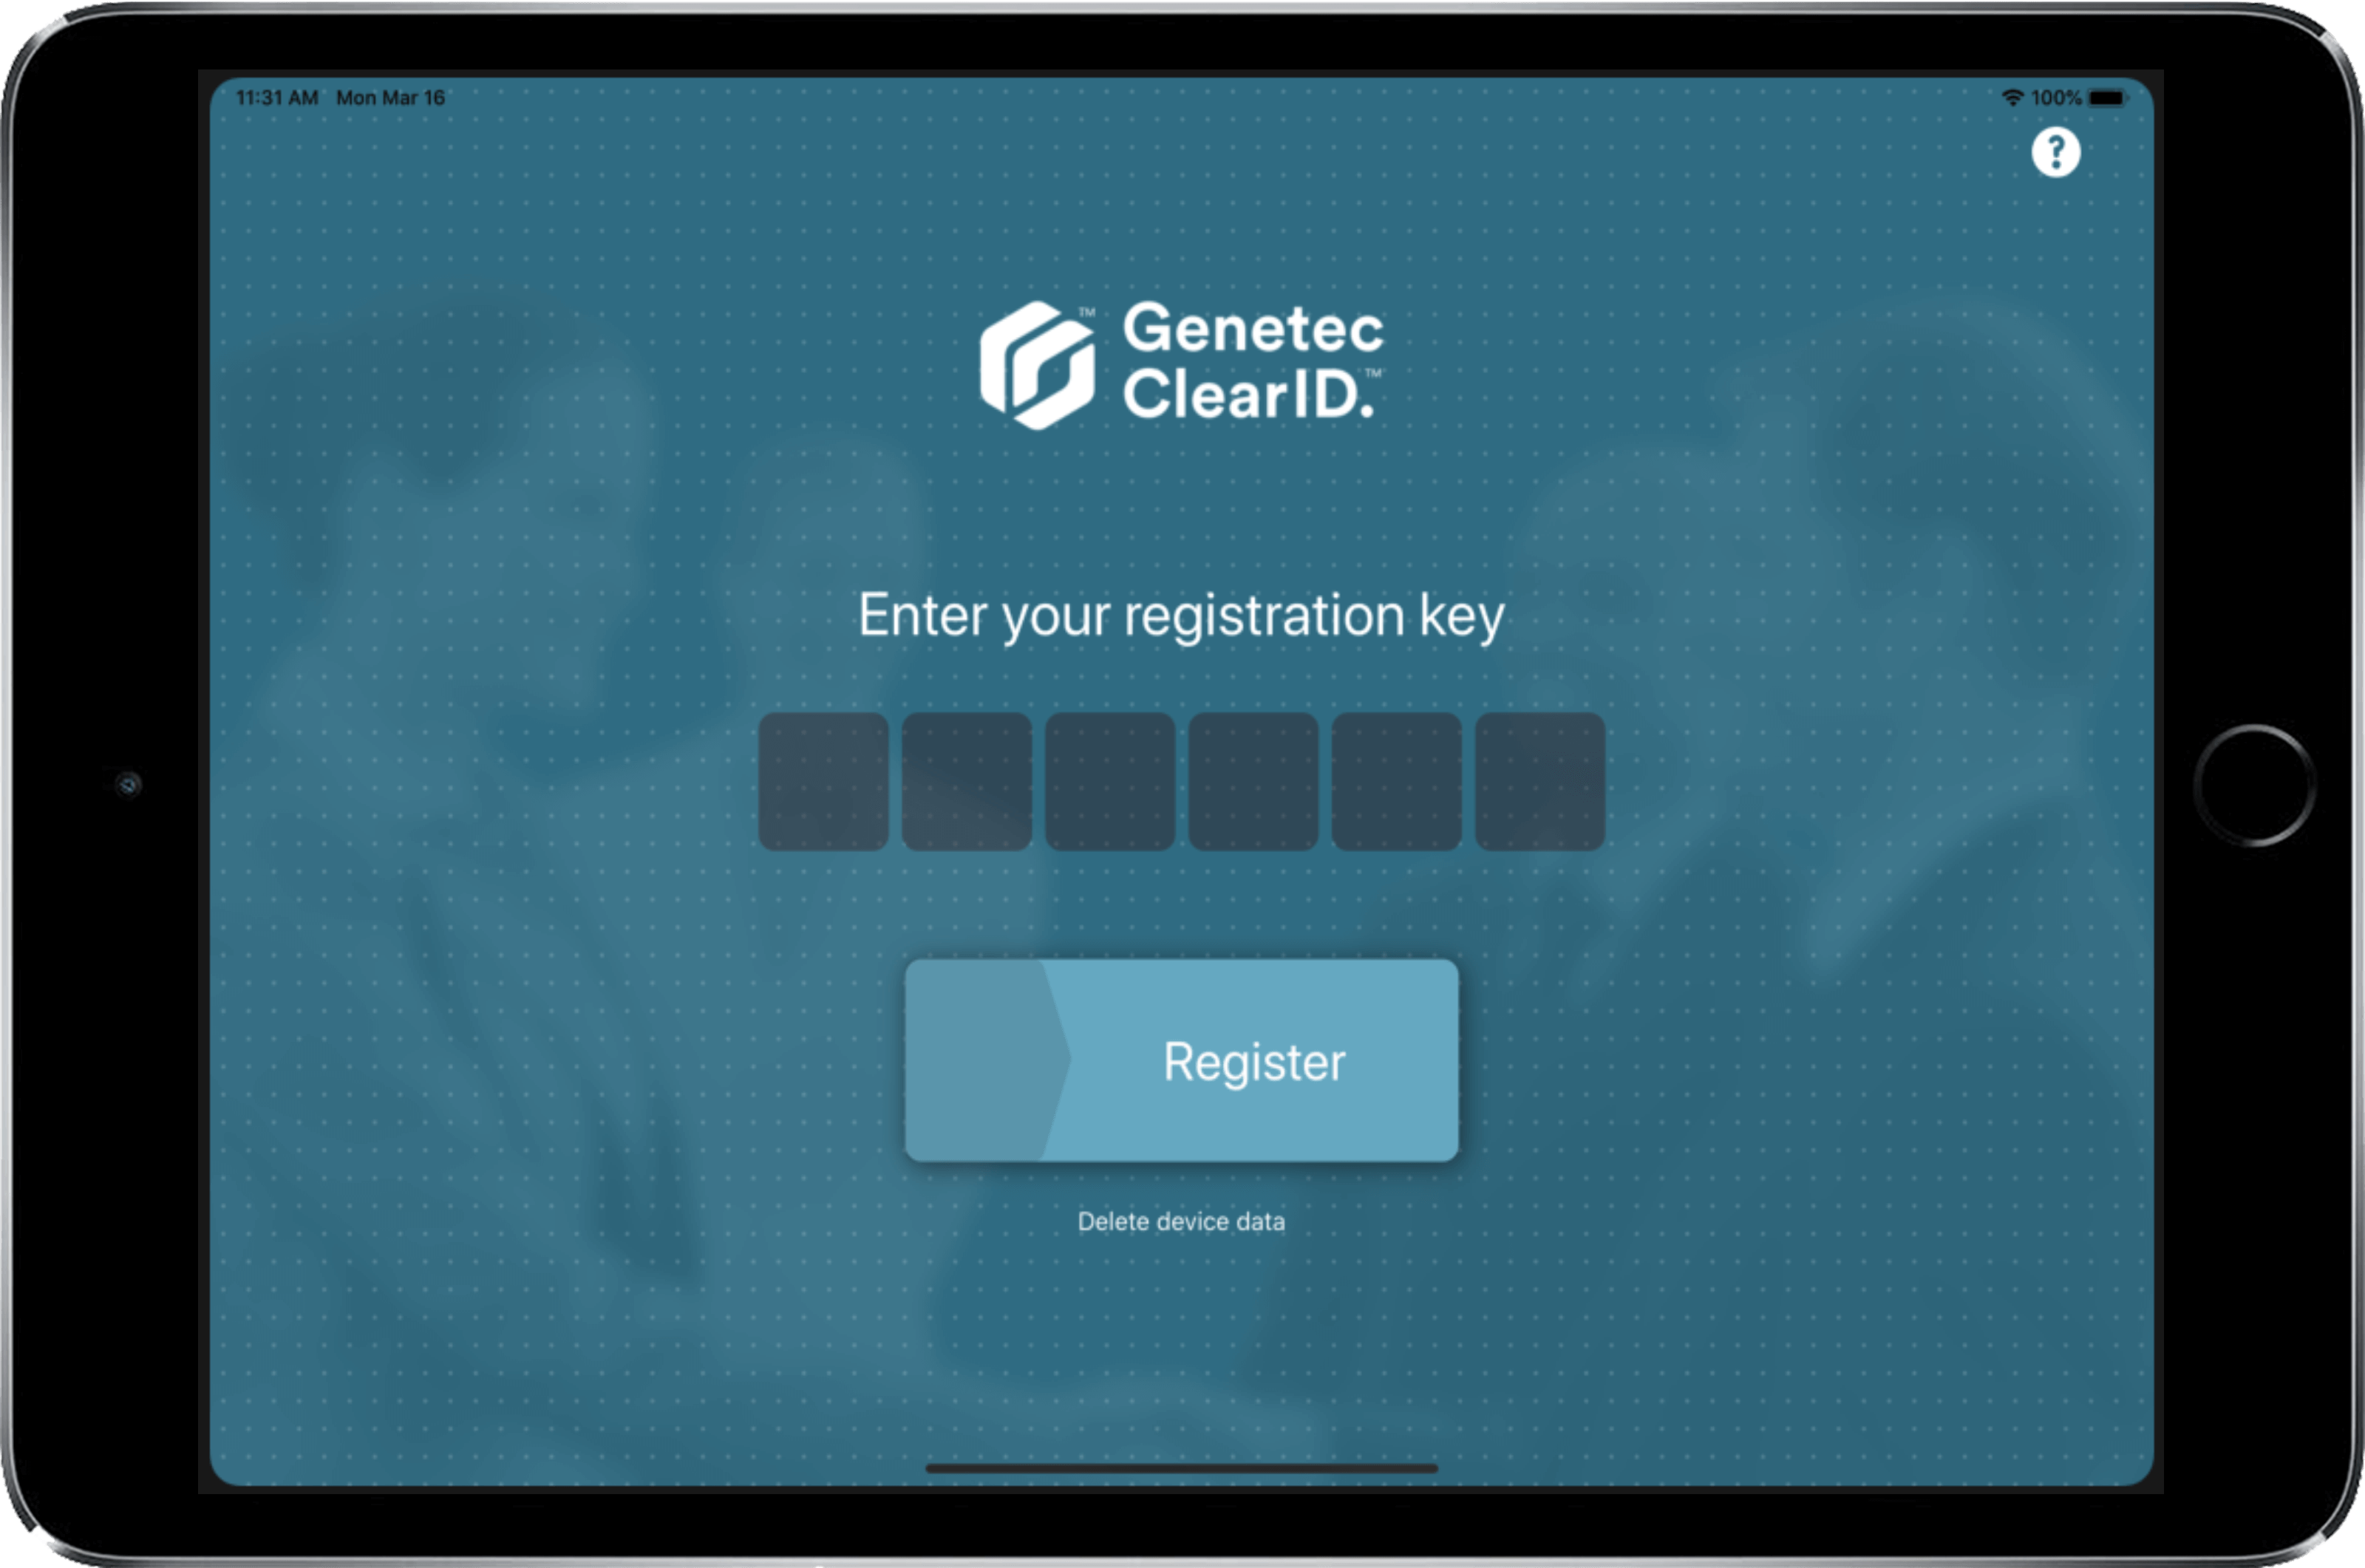 Example of the Genetec ClearID Self-Service Kiosk mobile app showing the registration key screen.